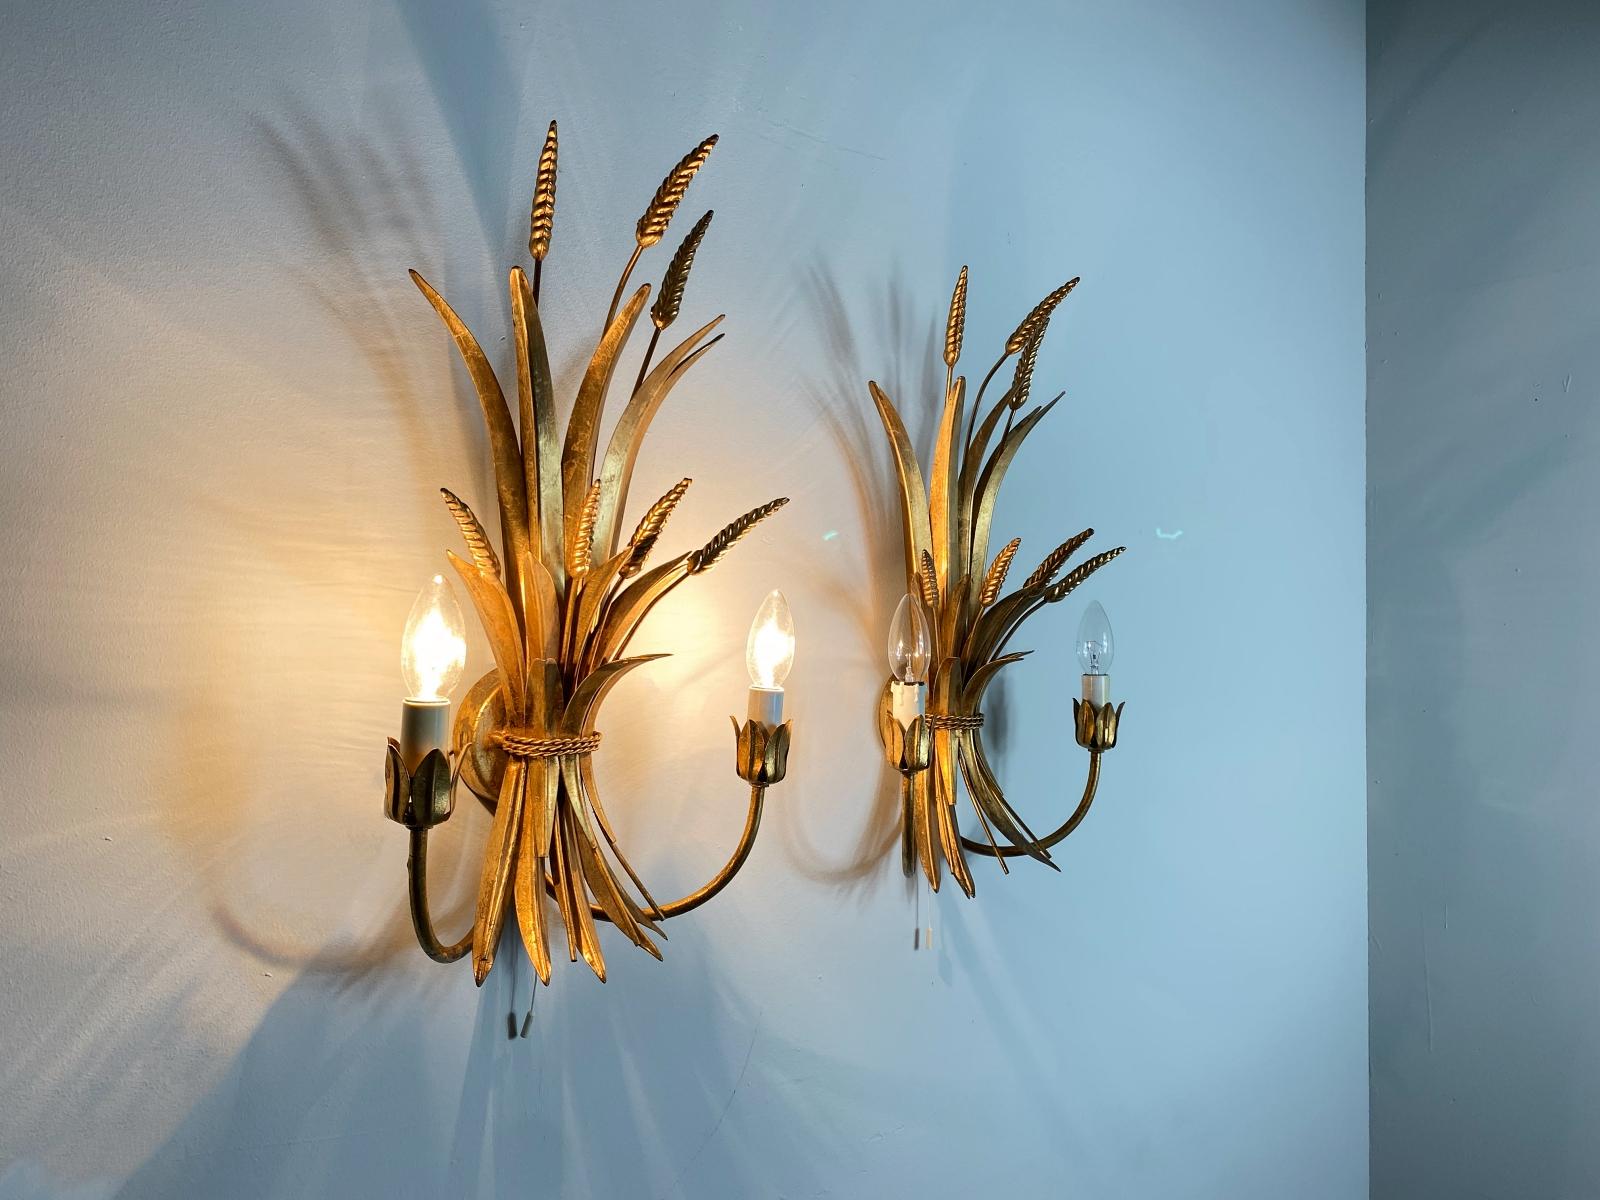 HANS KÖGL Pair Gilded Wheat Hollywood Regency Sconce Wall Lights, 1970s, Germany For Sale 1